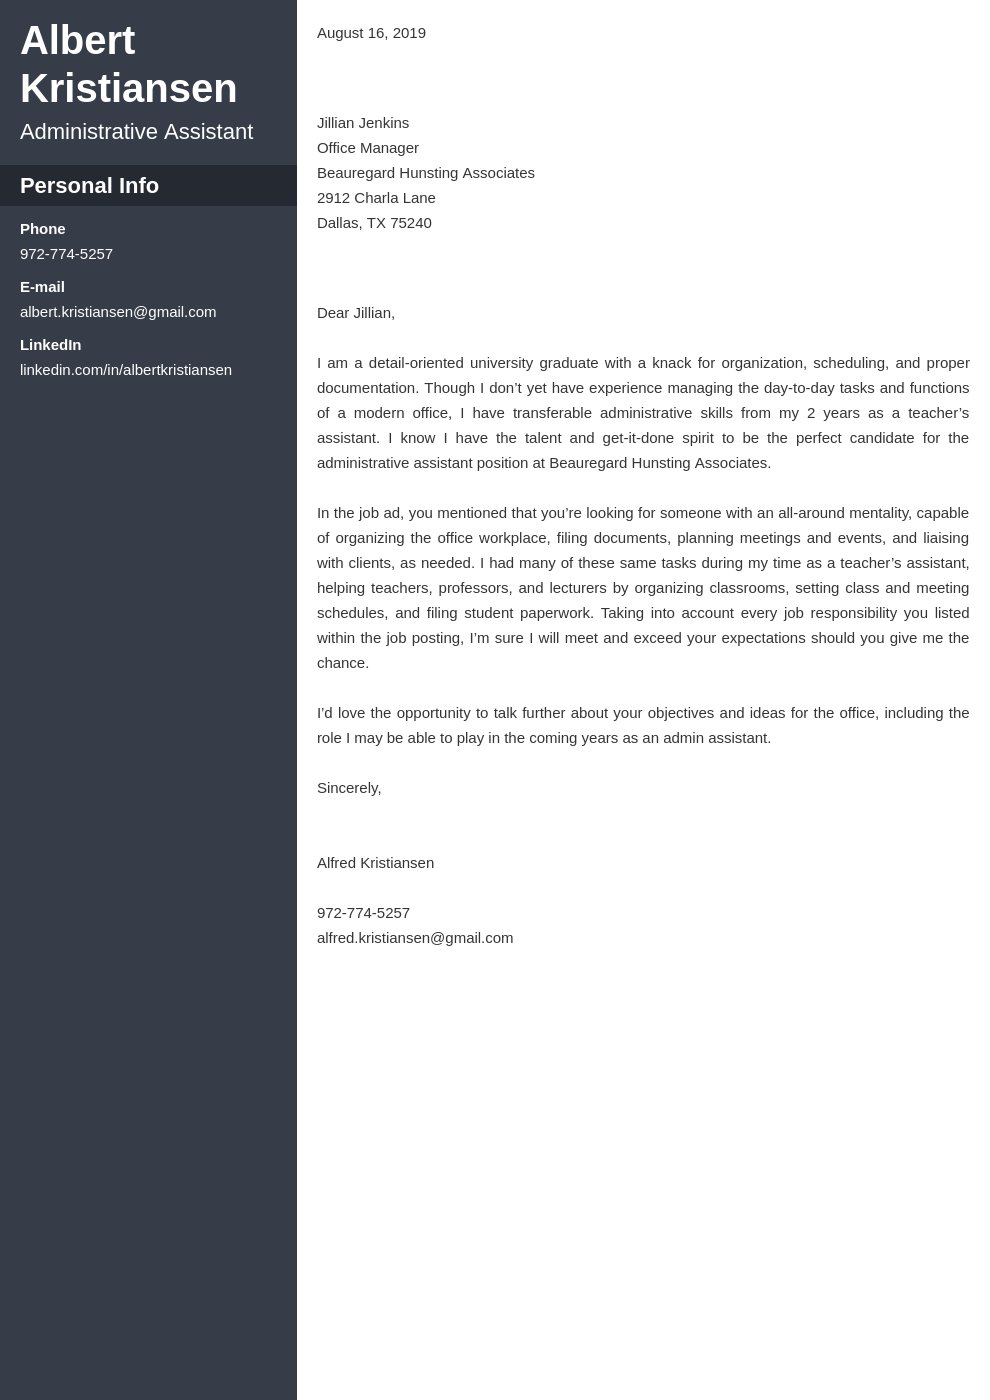 Administrative Assistant Cover Letter: Examples & Ready Templates